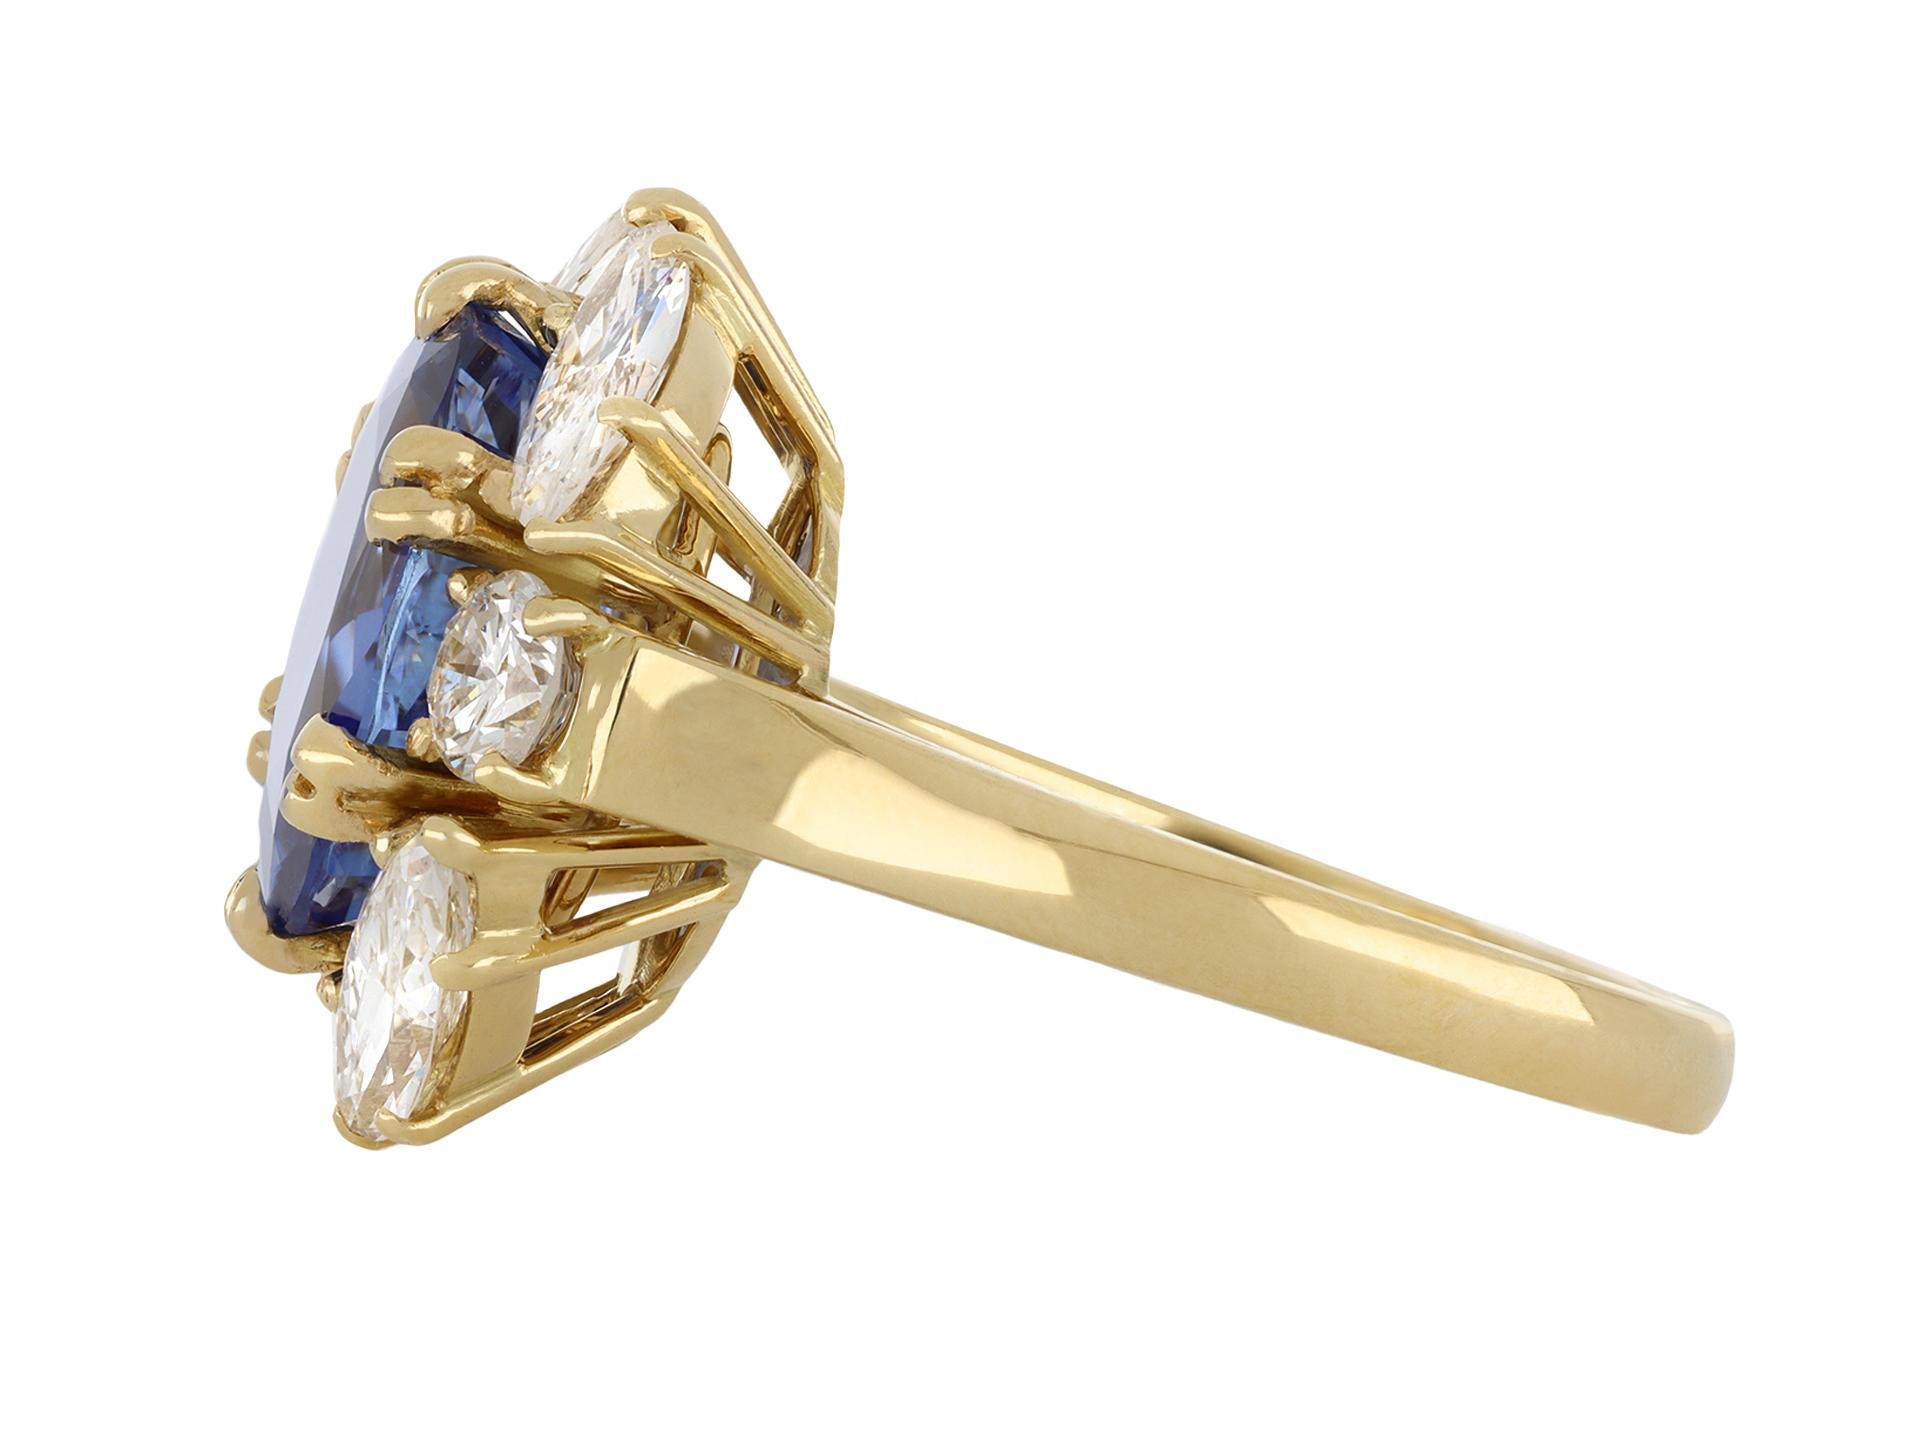 Vintage Ceylon sapphire and diamond cluster ring. Centrally set with one oval old cut natural unenhanced Ceylon sapphire in an open back claw setting with an approximate weight of 5.98 carats, further set with four marquise brilliant cut diamonds in